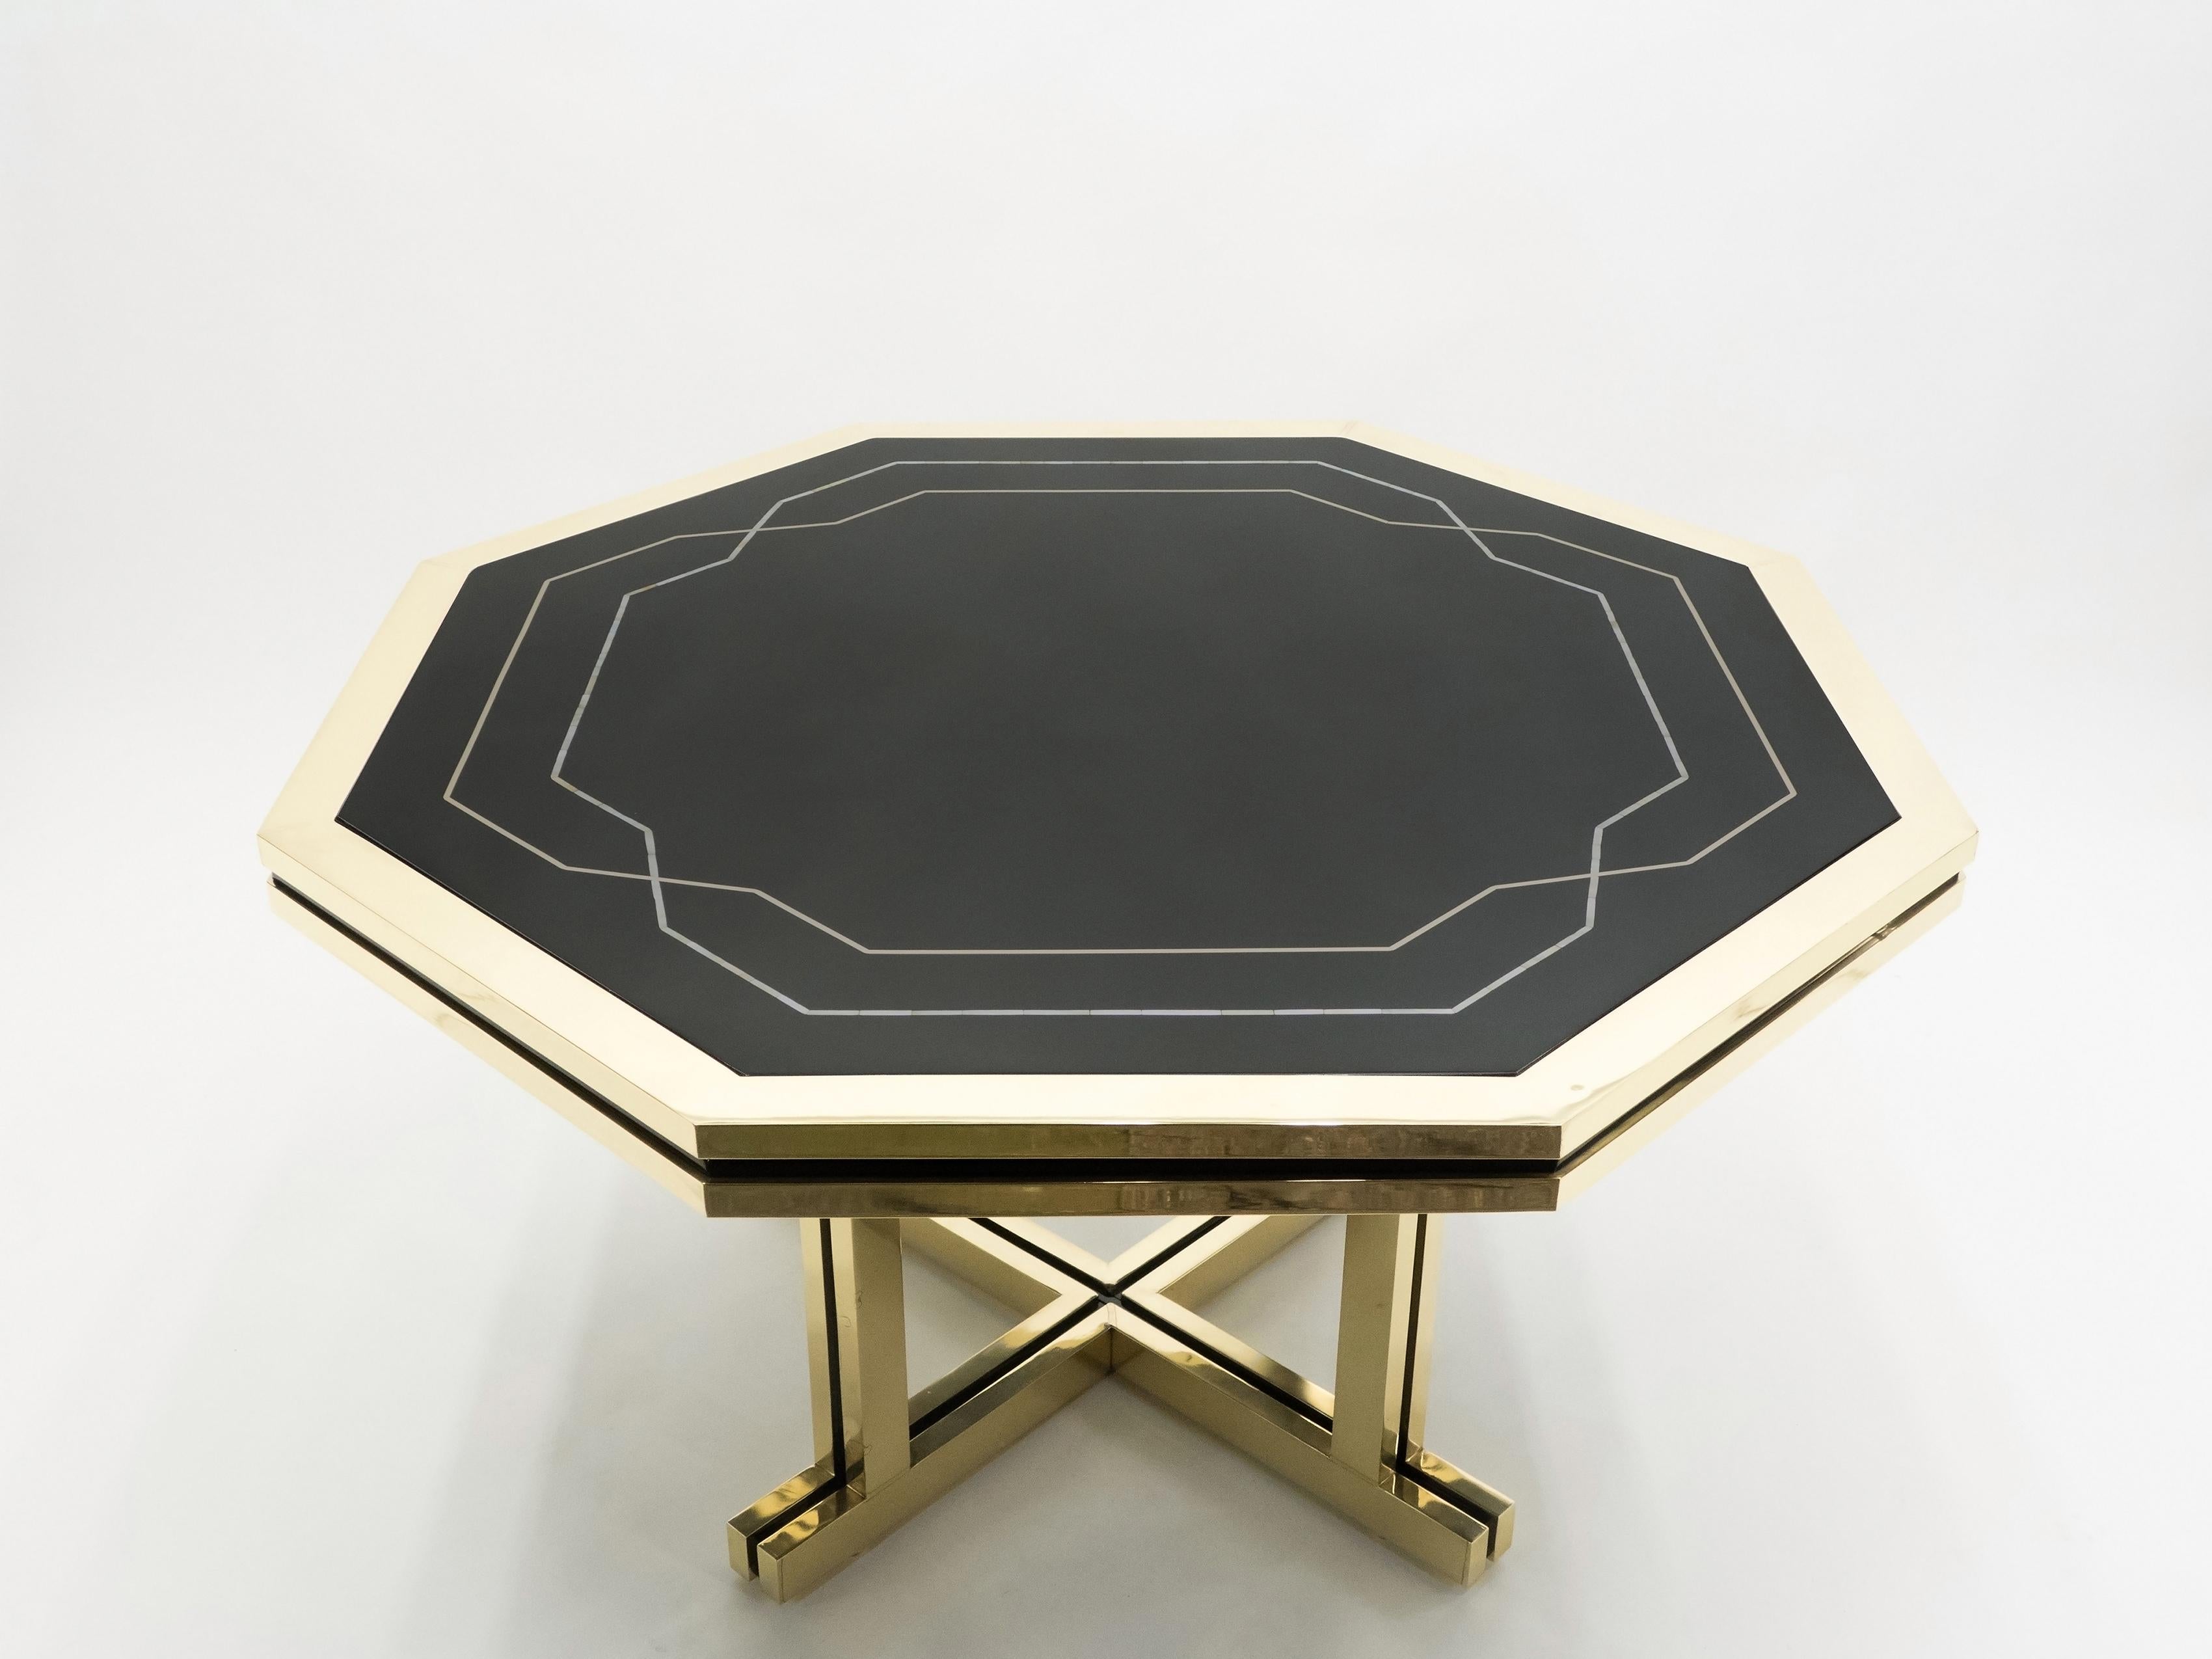 A rare piece from Maison Jansen, this octagonal dining table was a commission by a private client. With its impeccable design, perfect proportions, and high-end materials like mother of pearl lacquer and brass, it was likely a hugely expensive